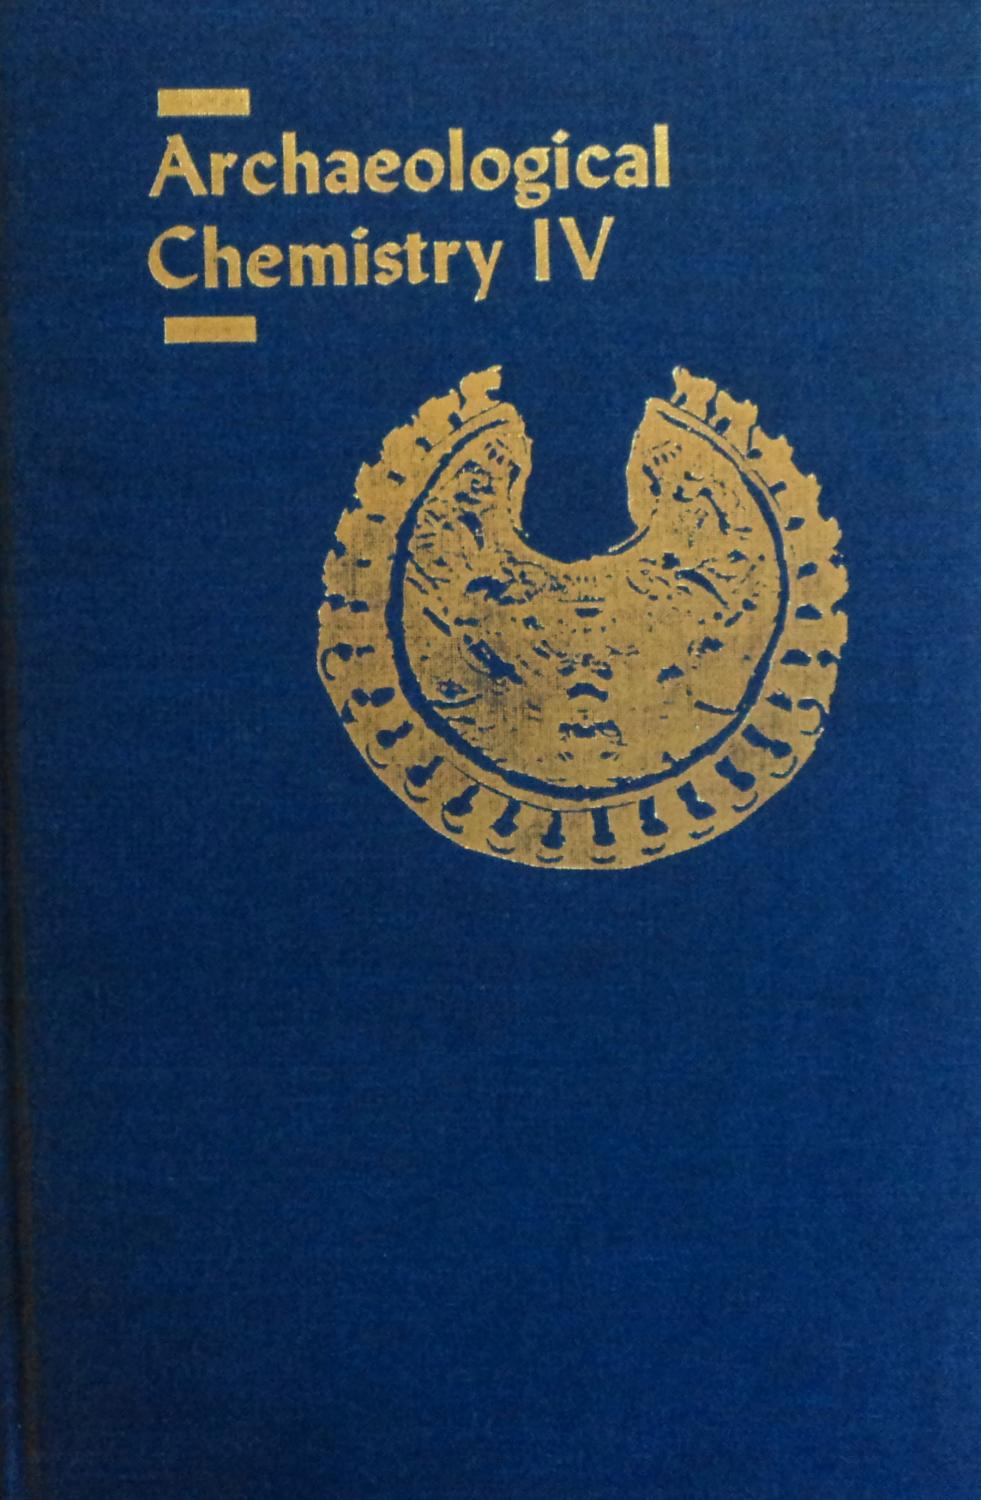 Archaeological Chemistry IV (Advances in Chemistry Series)